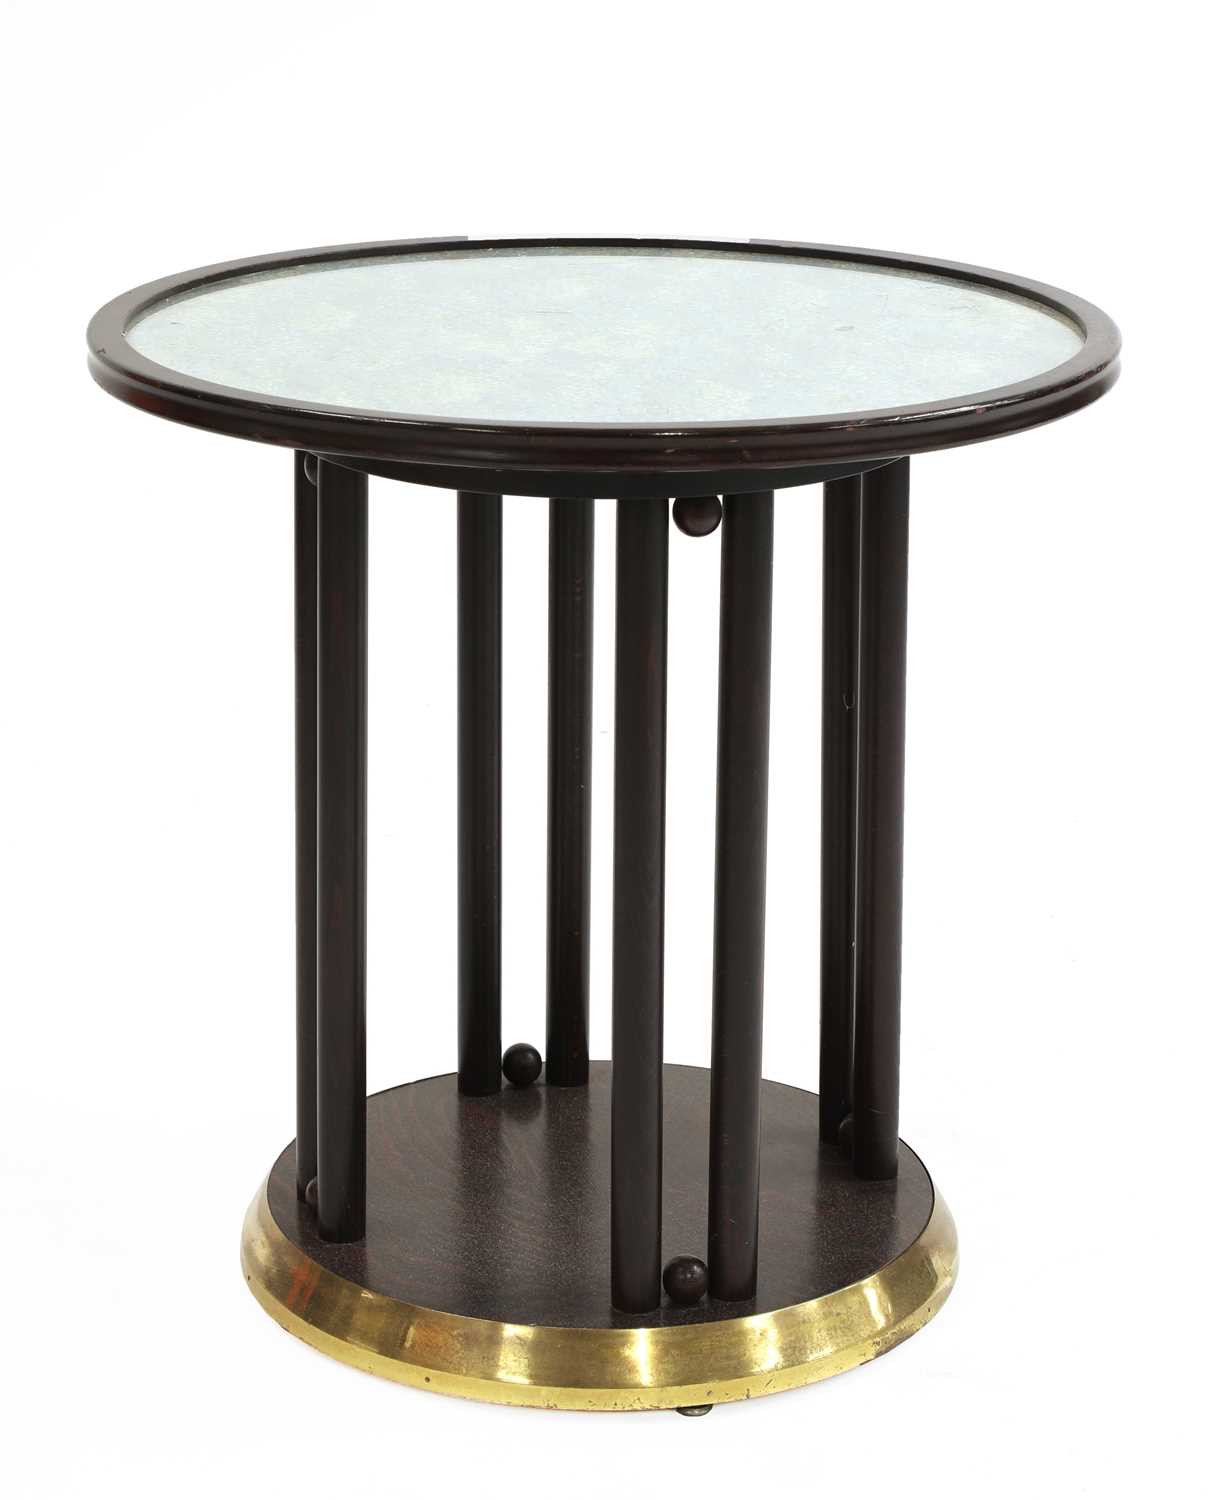 Lot 86 - A Fledermaus occasional table